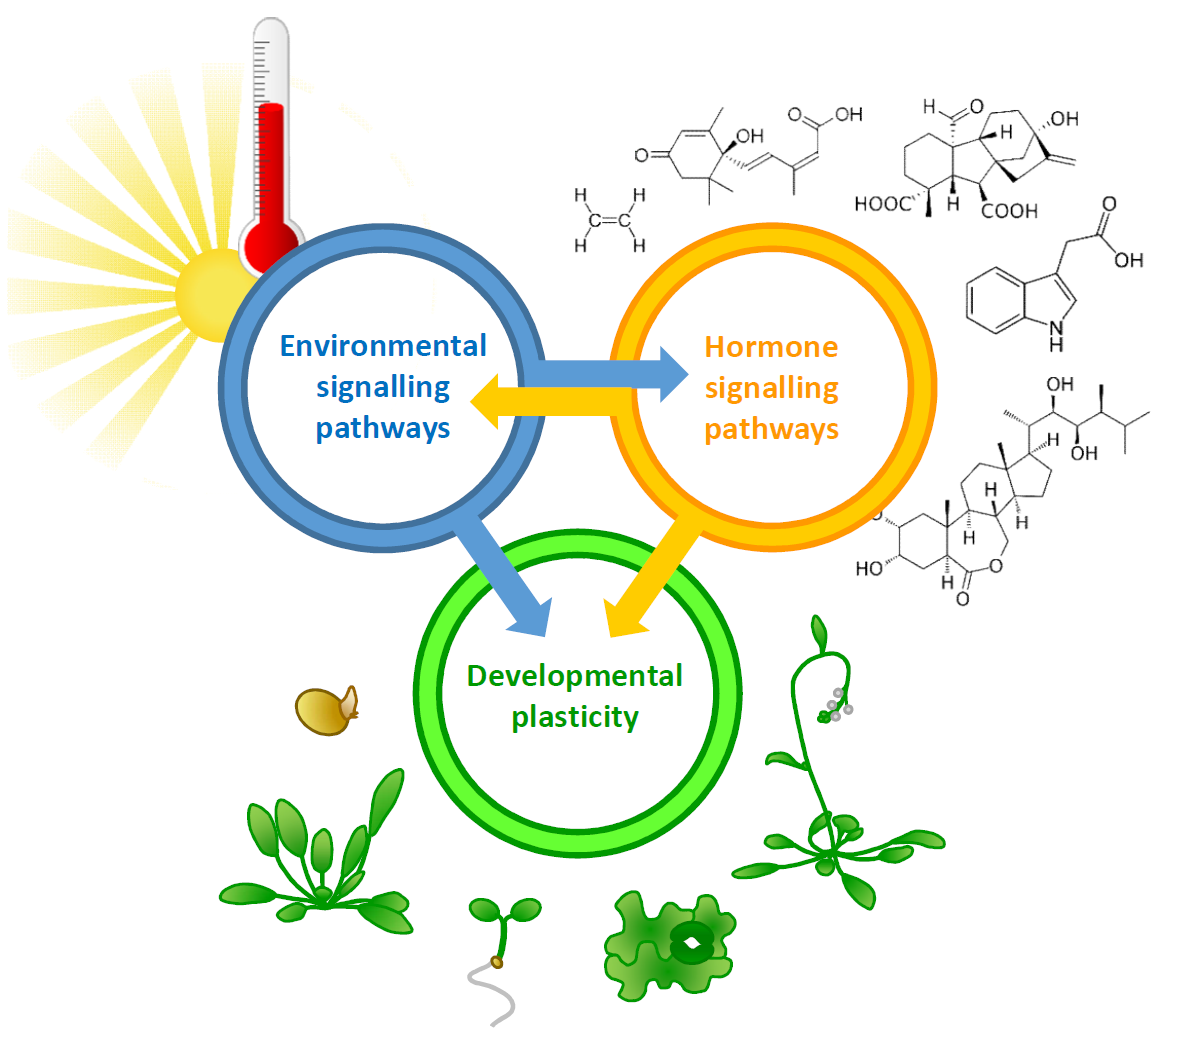 Dr Balcerowicz is investigating how environmental signals trigger endogenous processes in plants. Diagram by Martin Balcerowicz.